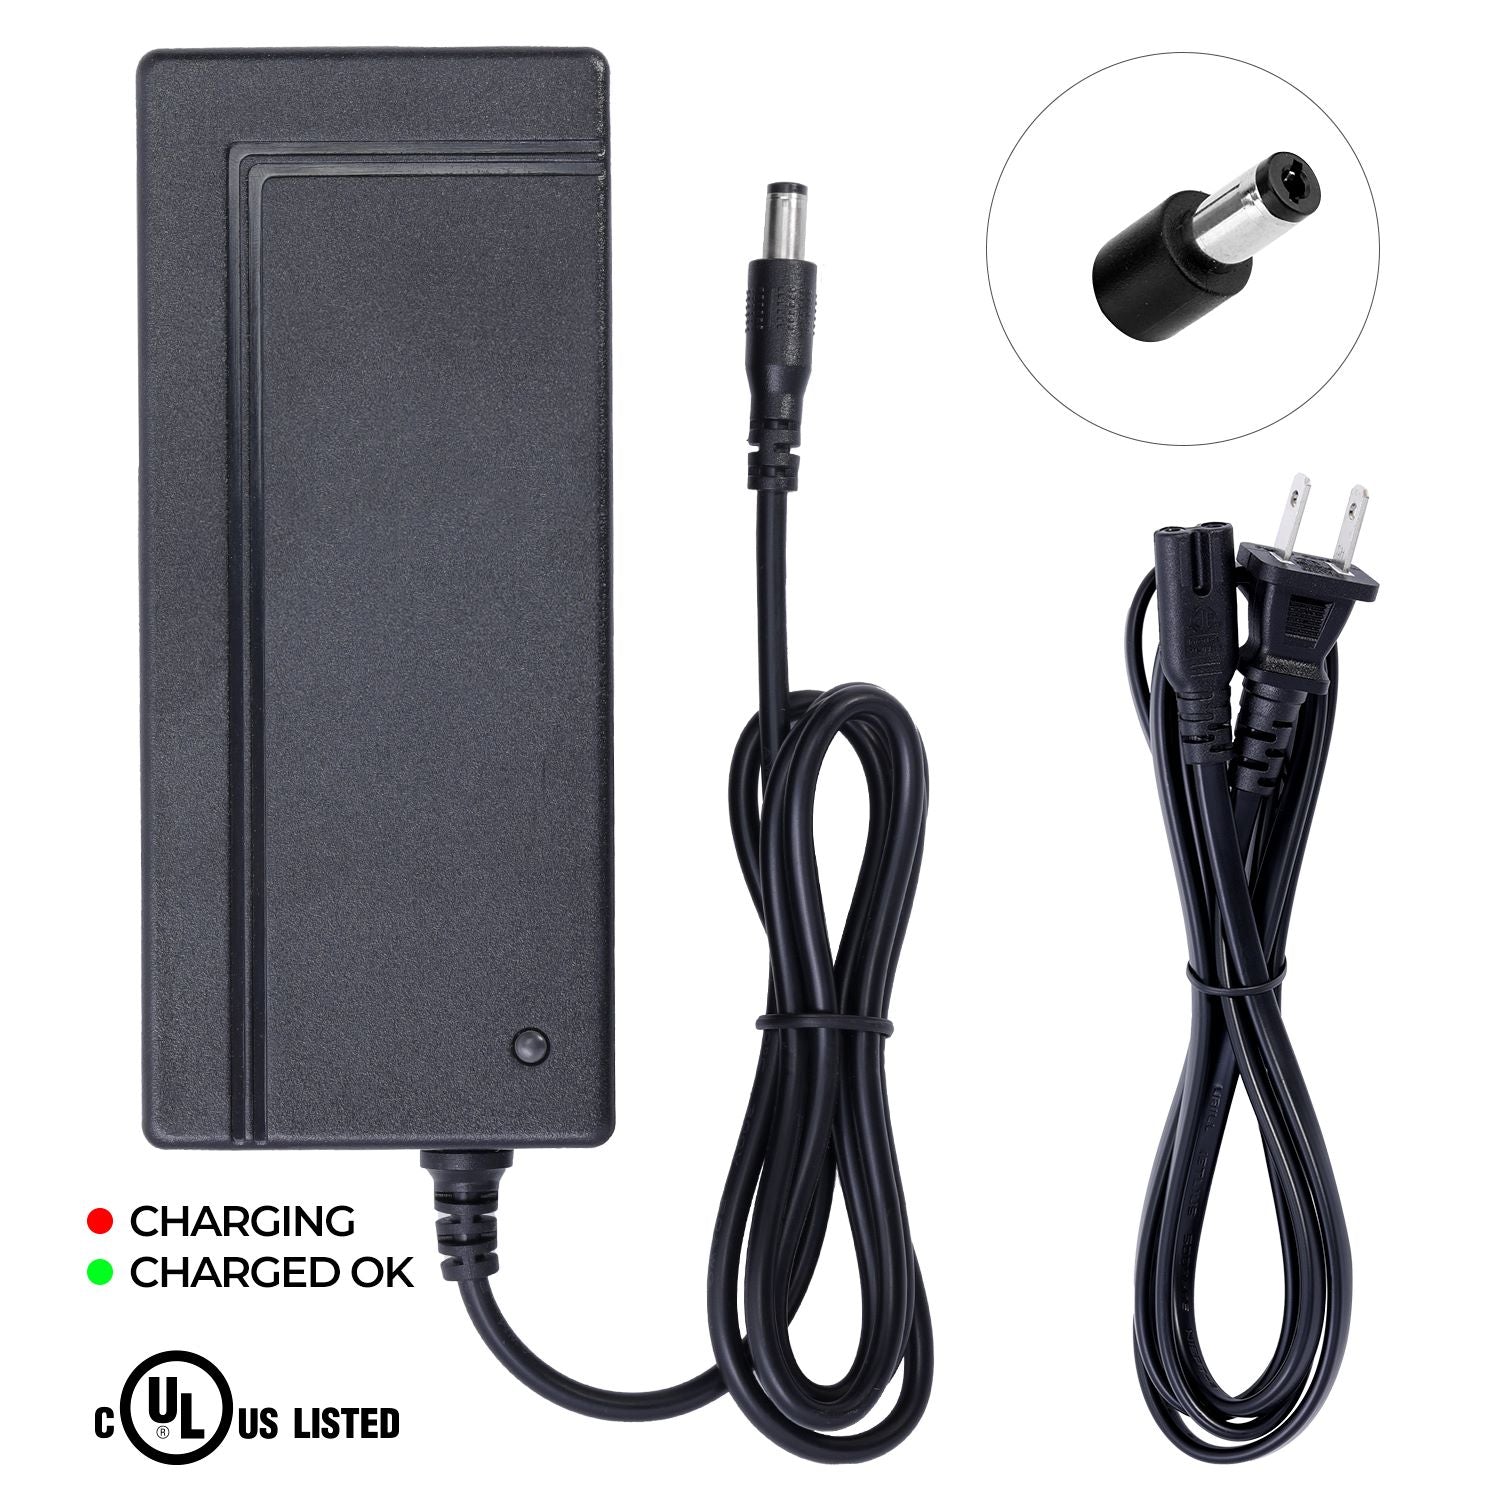 UL Certified Charger for Evercross E1 Electric Kick Scooter (NOT for Hoverboard)